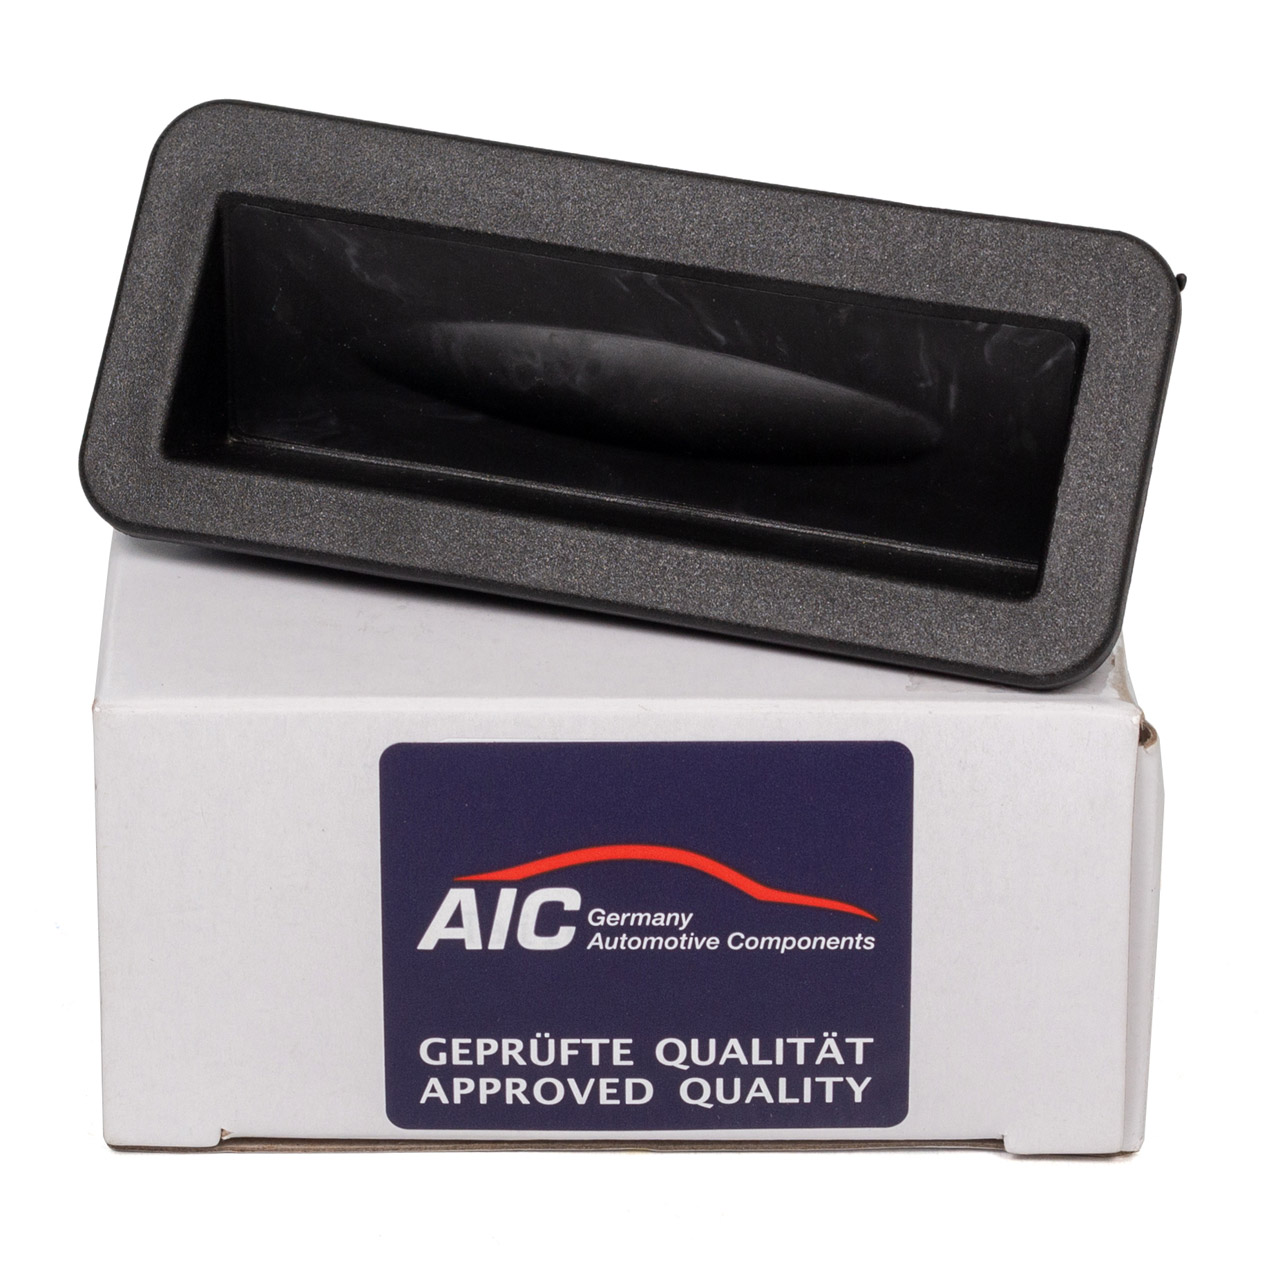 AIC 56659 Heckklappengriff Griff Kofferraumklappe FORD Focus 2 MK2 Kuga 1 Mondeo 4 1857333